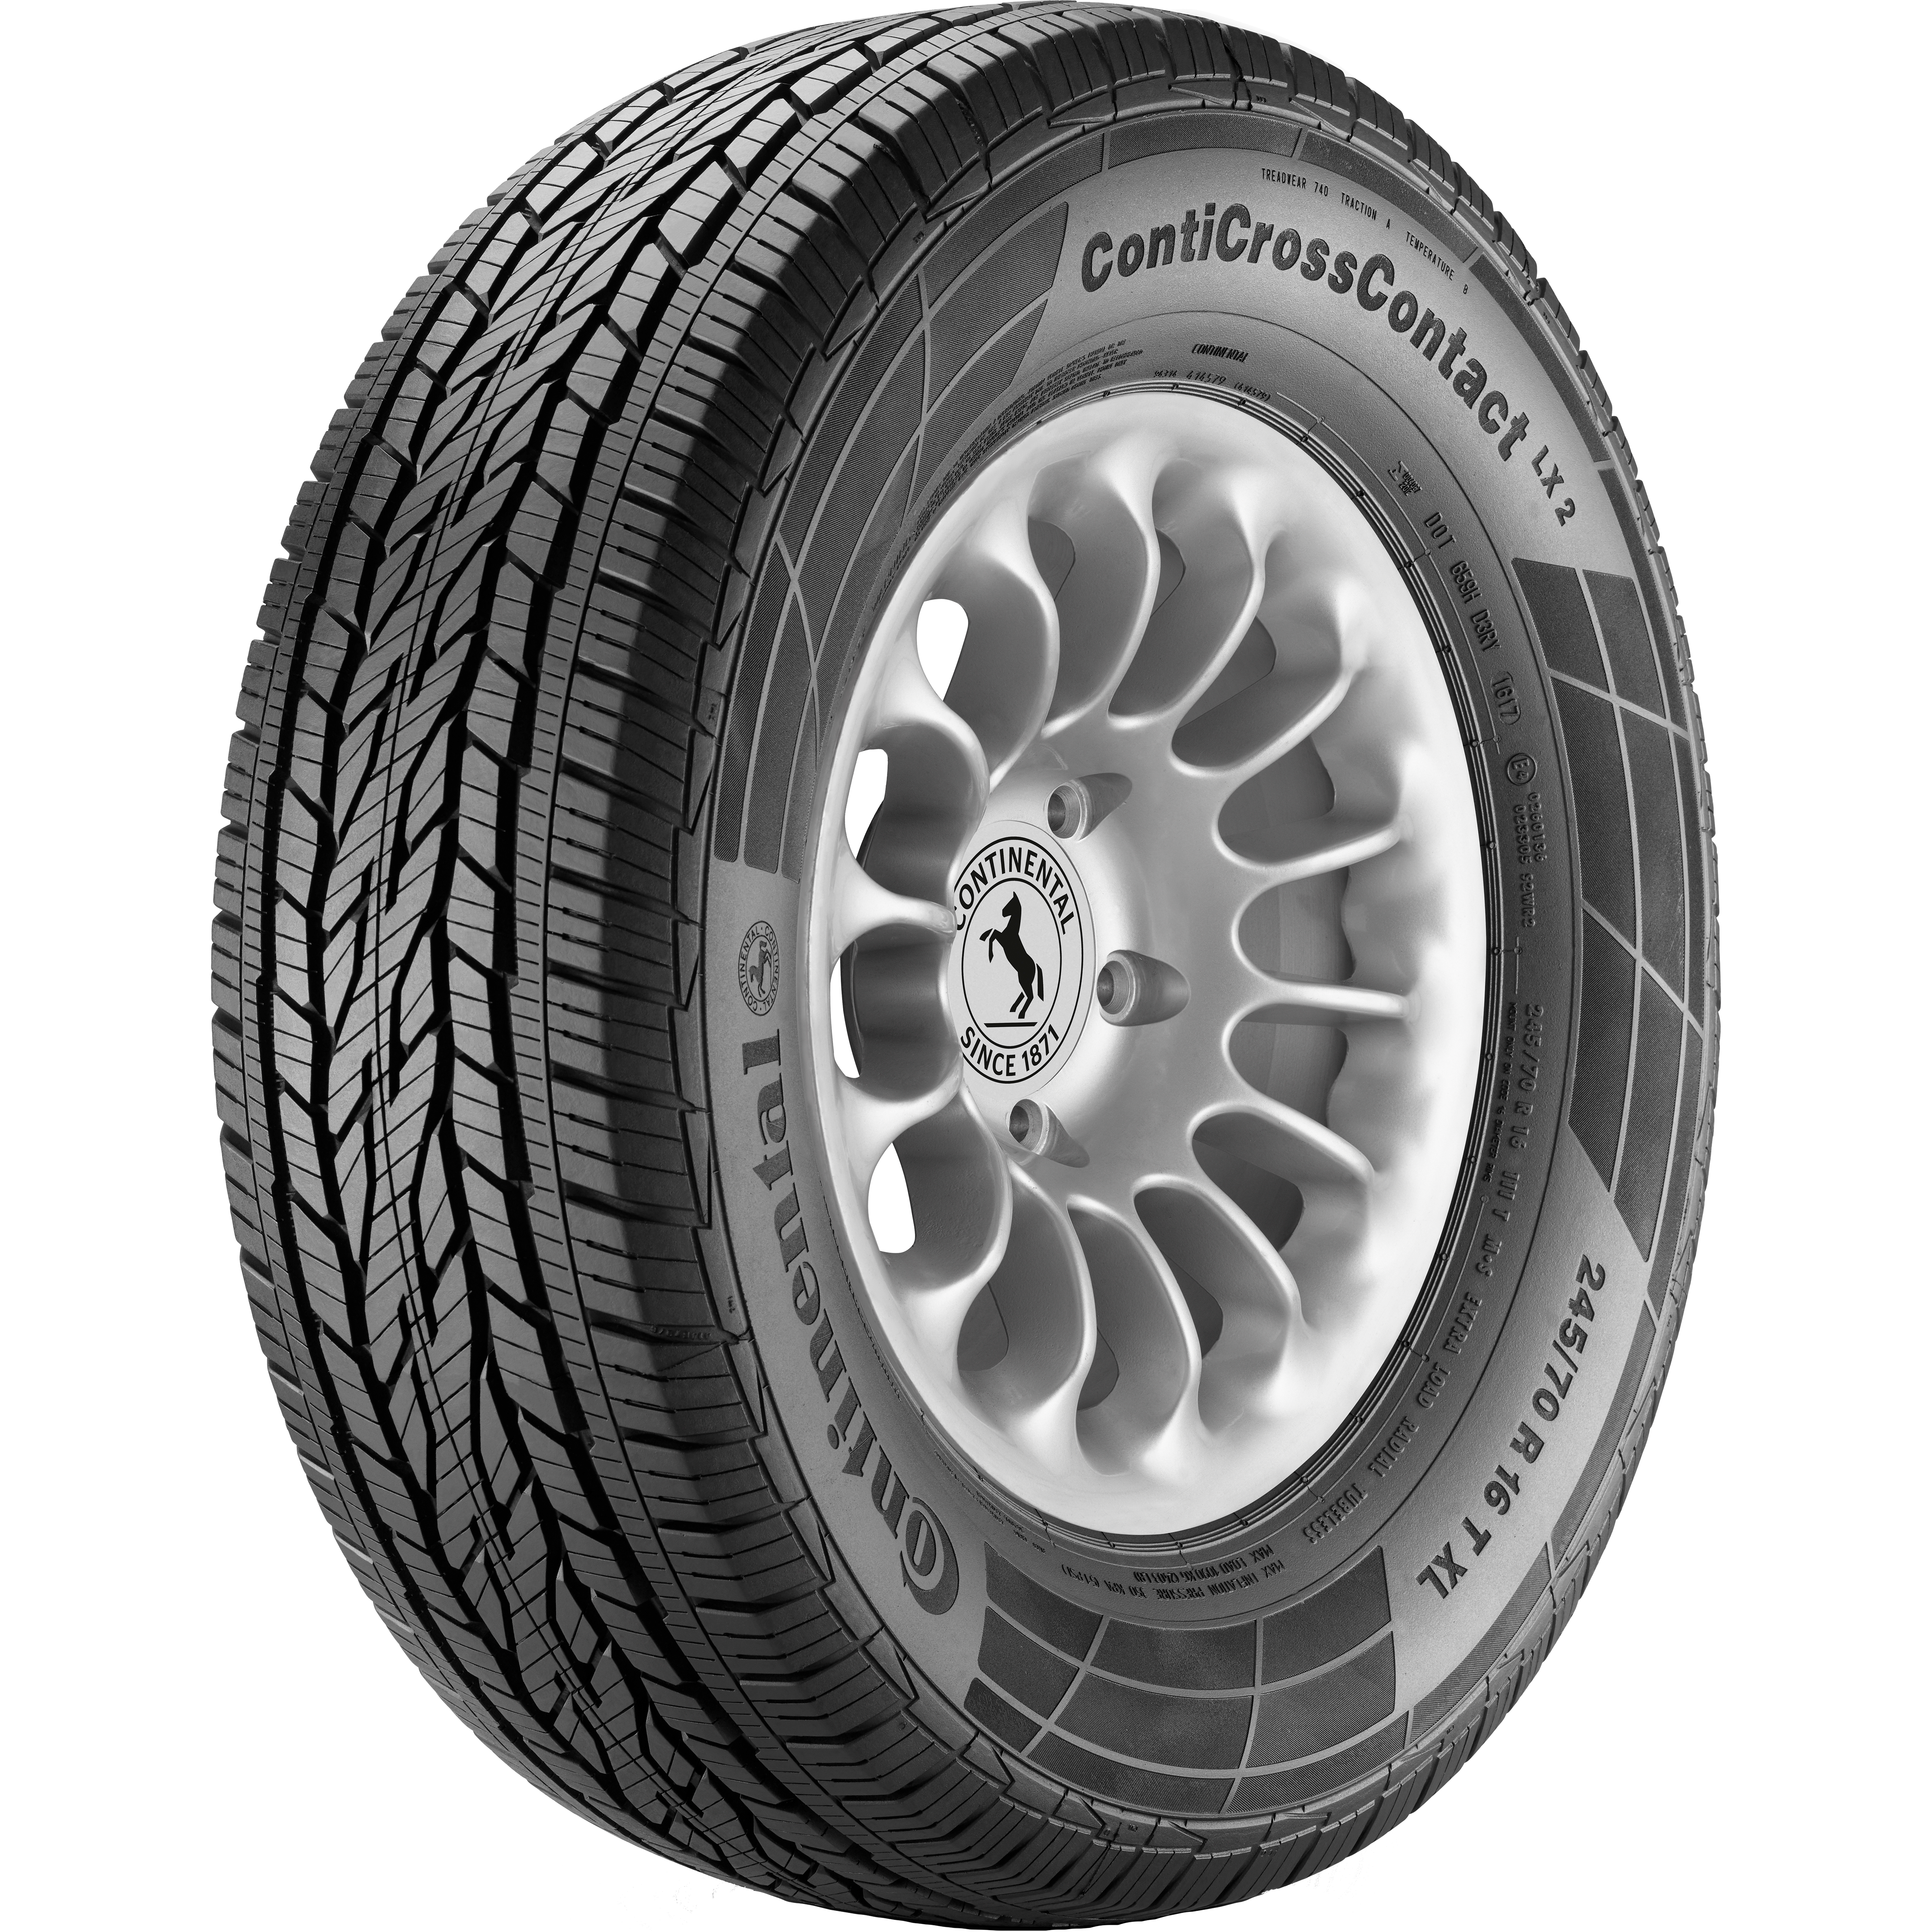 215/65 R 16 98H CONTICROSSCONTACT LX 2 Evc m+s Fr TL